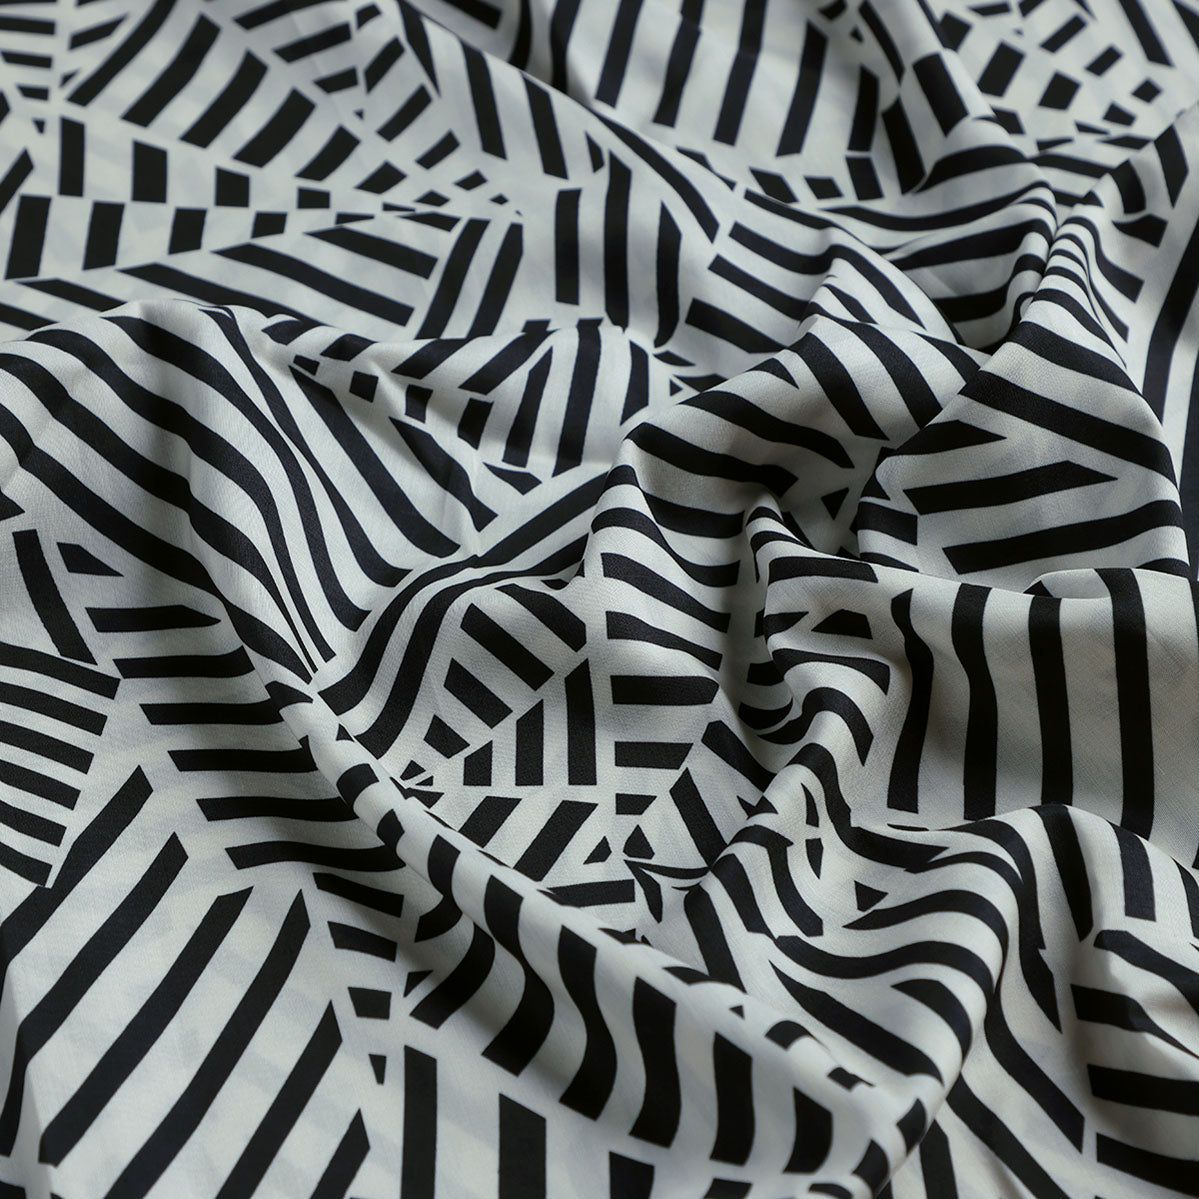 Attractive Black Strips With Bone Colour Digital Printed Fabric - Muslin